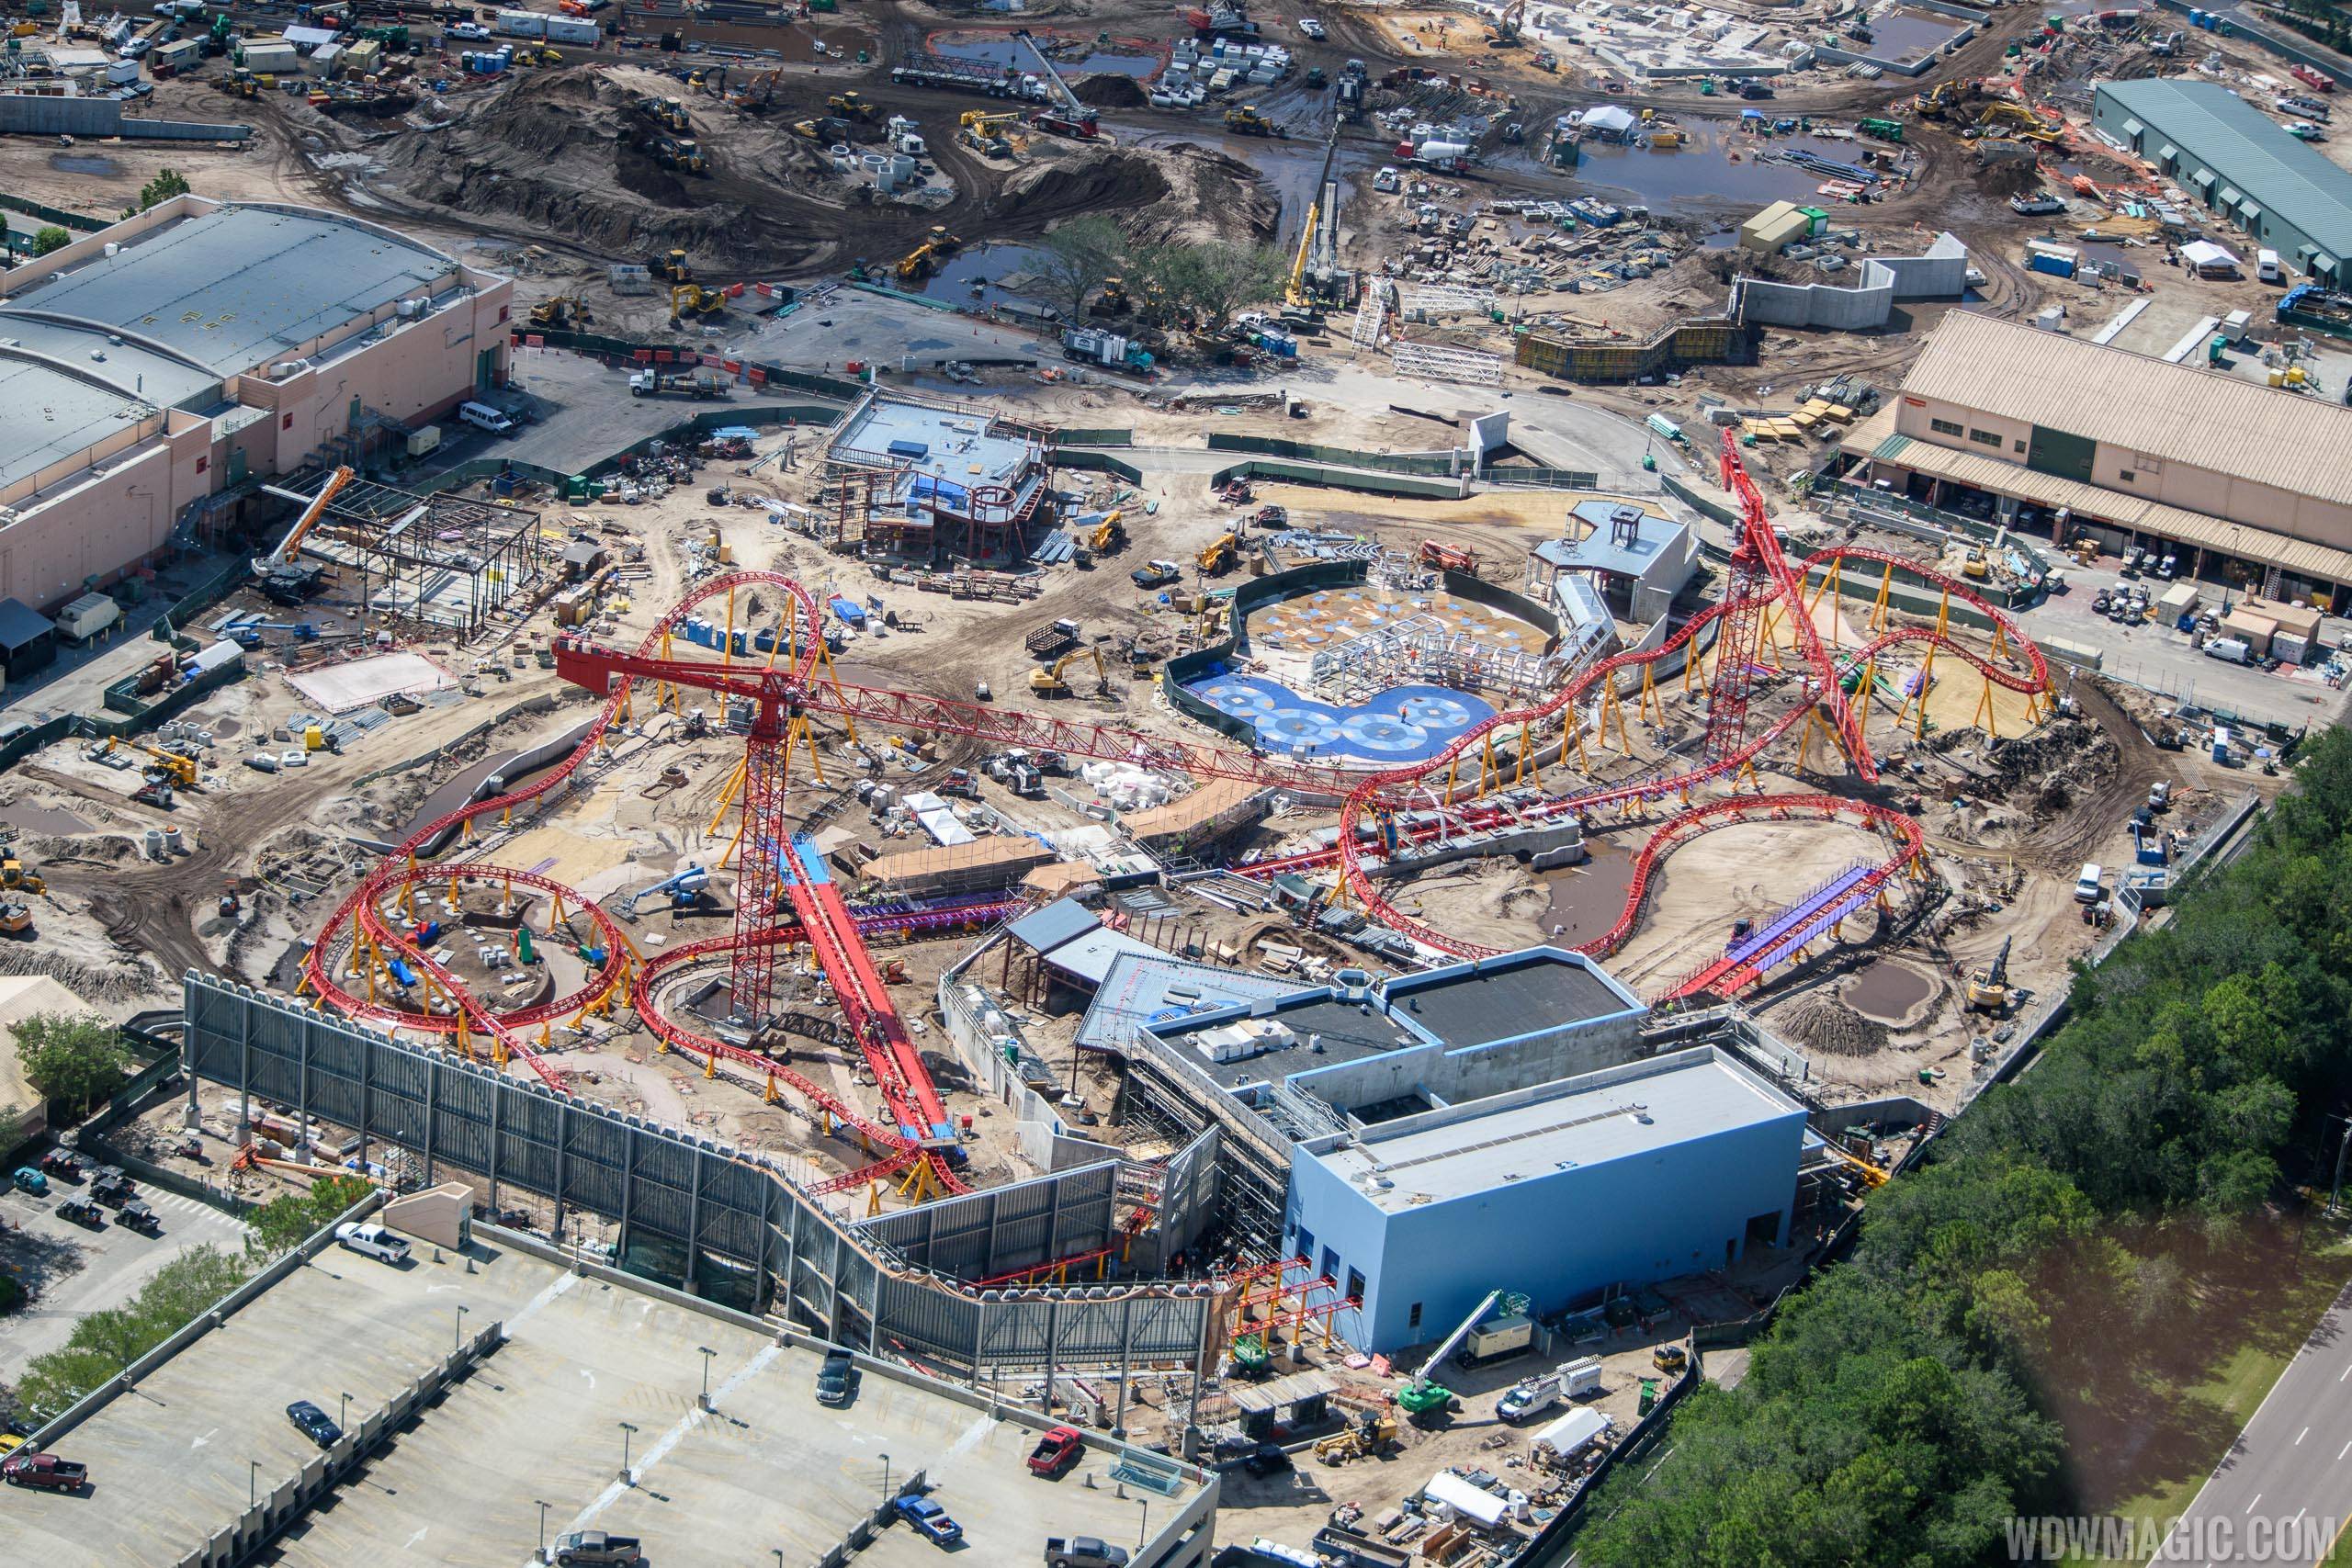 Wide view of Toy Story Land